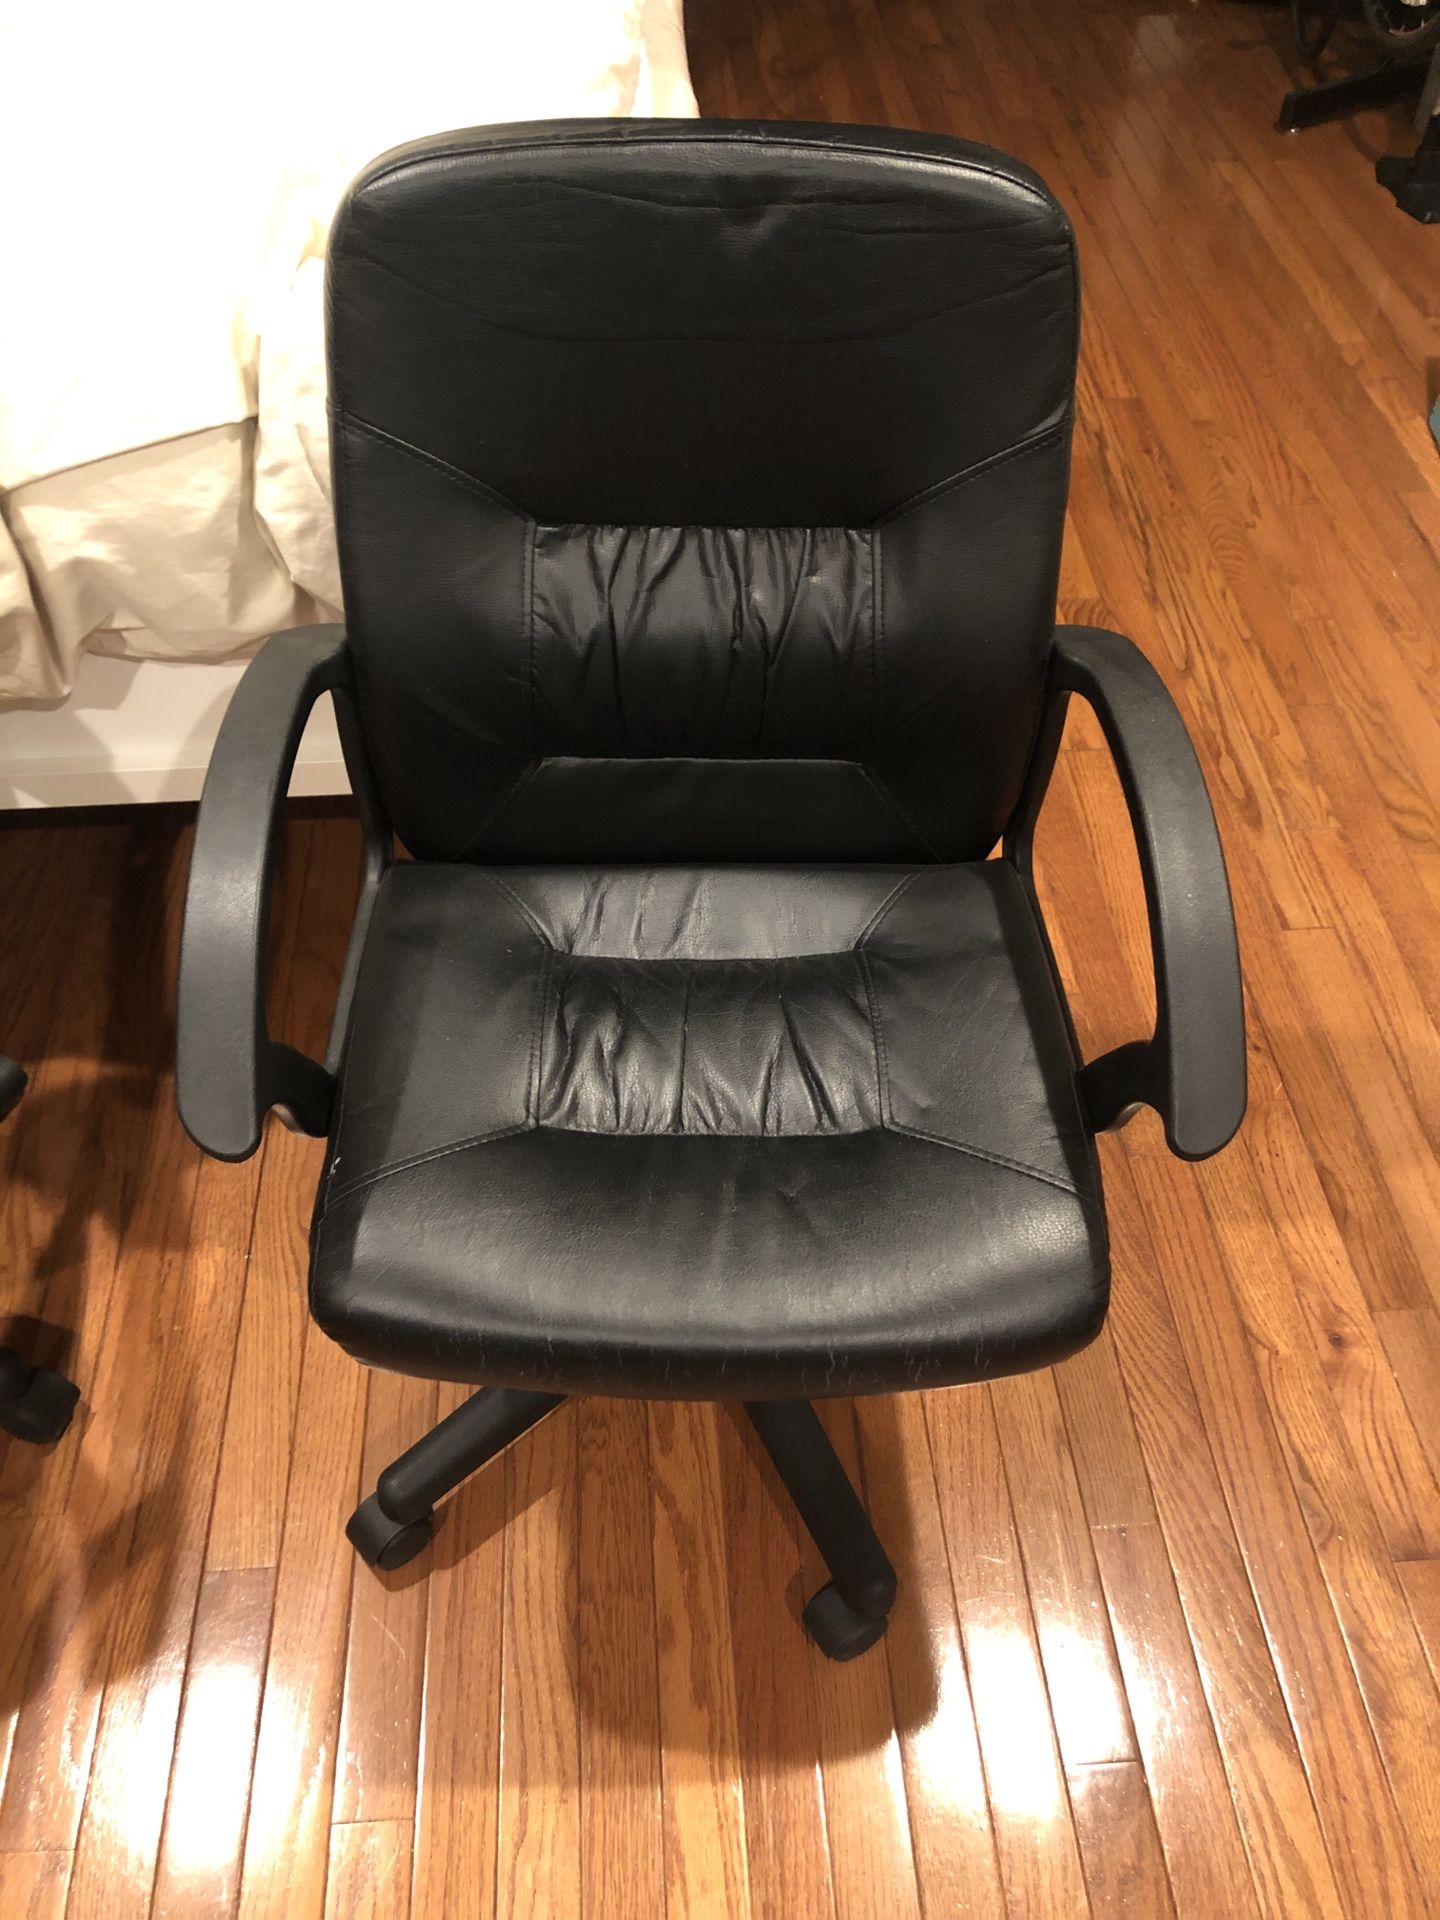 TWO IKEA desk chairs for FREE